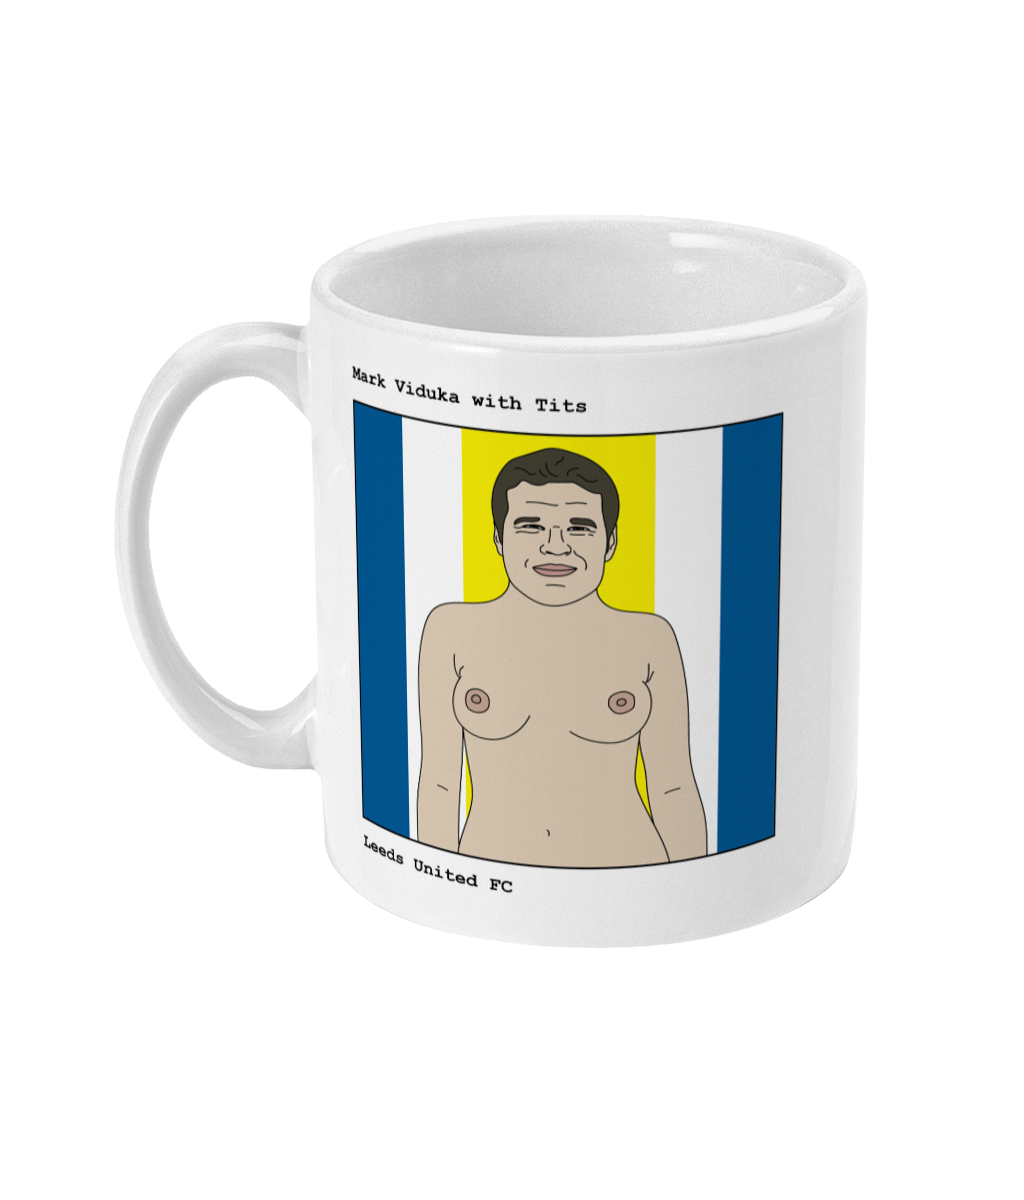 Mark Viduka with Tits - Footballers with Tits